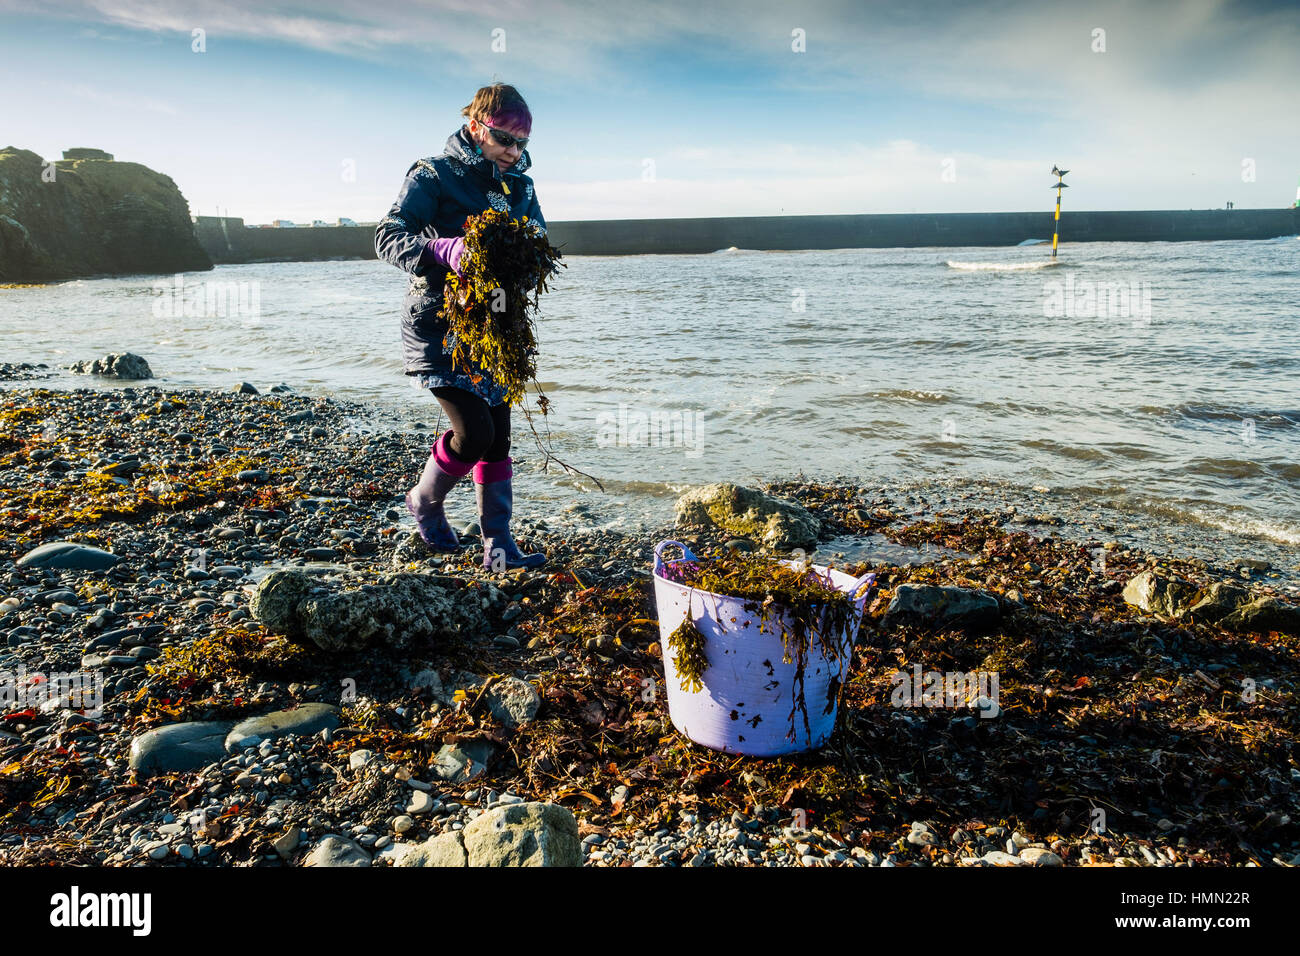 Aberystwyth Wales UK, Saturday 04 February 2017  After two days of stormy seas and huge waves, a woman gardener gathers the fronds of seaweed washed up by the gales on the beach at Aberystwyth to use as an organic fertilizer and mulch on her allotment garden.   Seaweed has been used as a soil improver for centuries, particularly in coastal areas , and is a useful substitute for farmyard manure.   Seaweed contains several useful plant nutrients, including nitrogen, potassium, phosphate and magnesium   photo ©Keith Morris / Alamy Live News Stock Photo